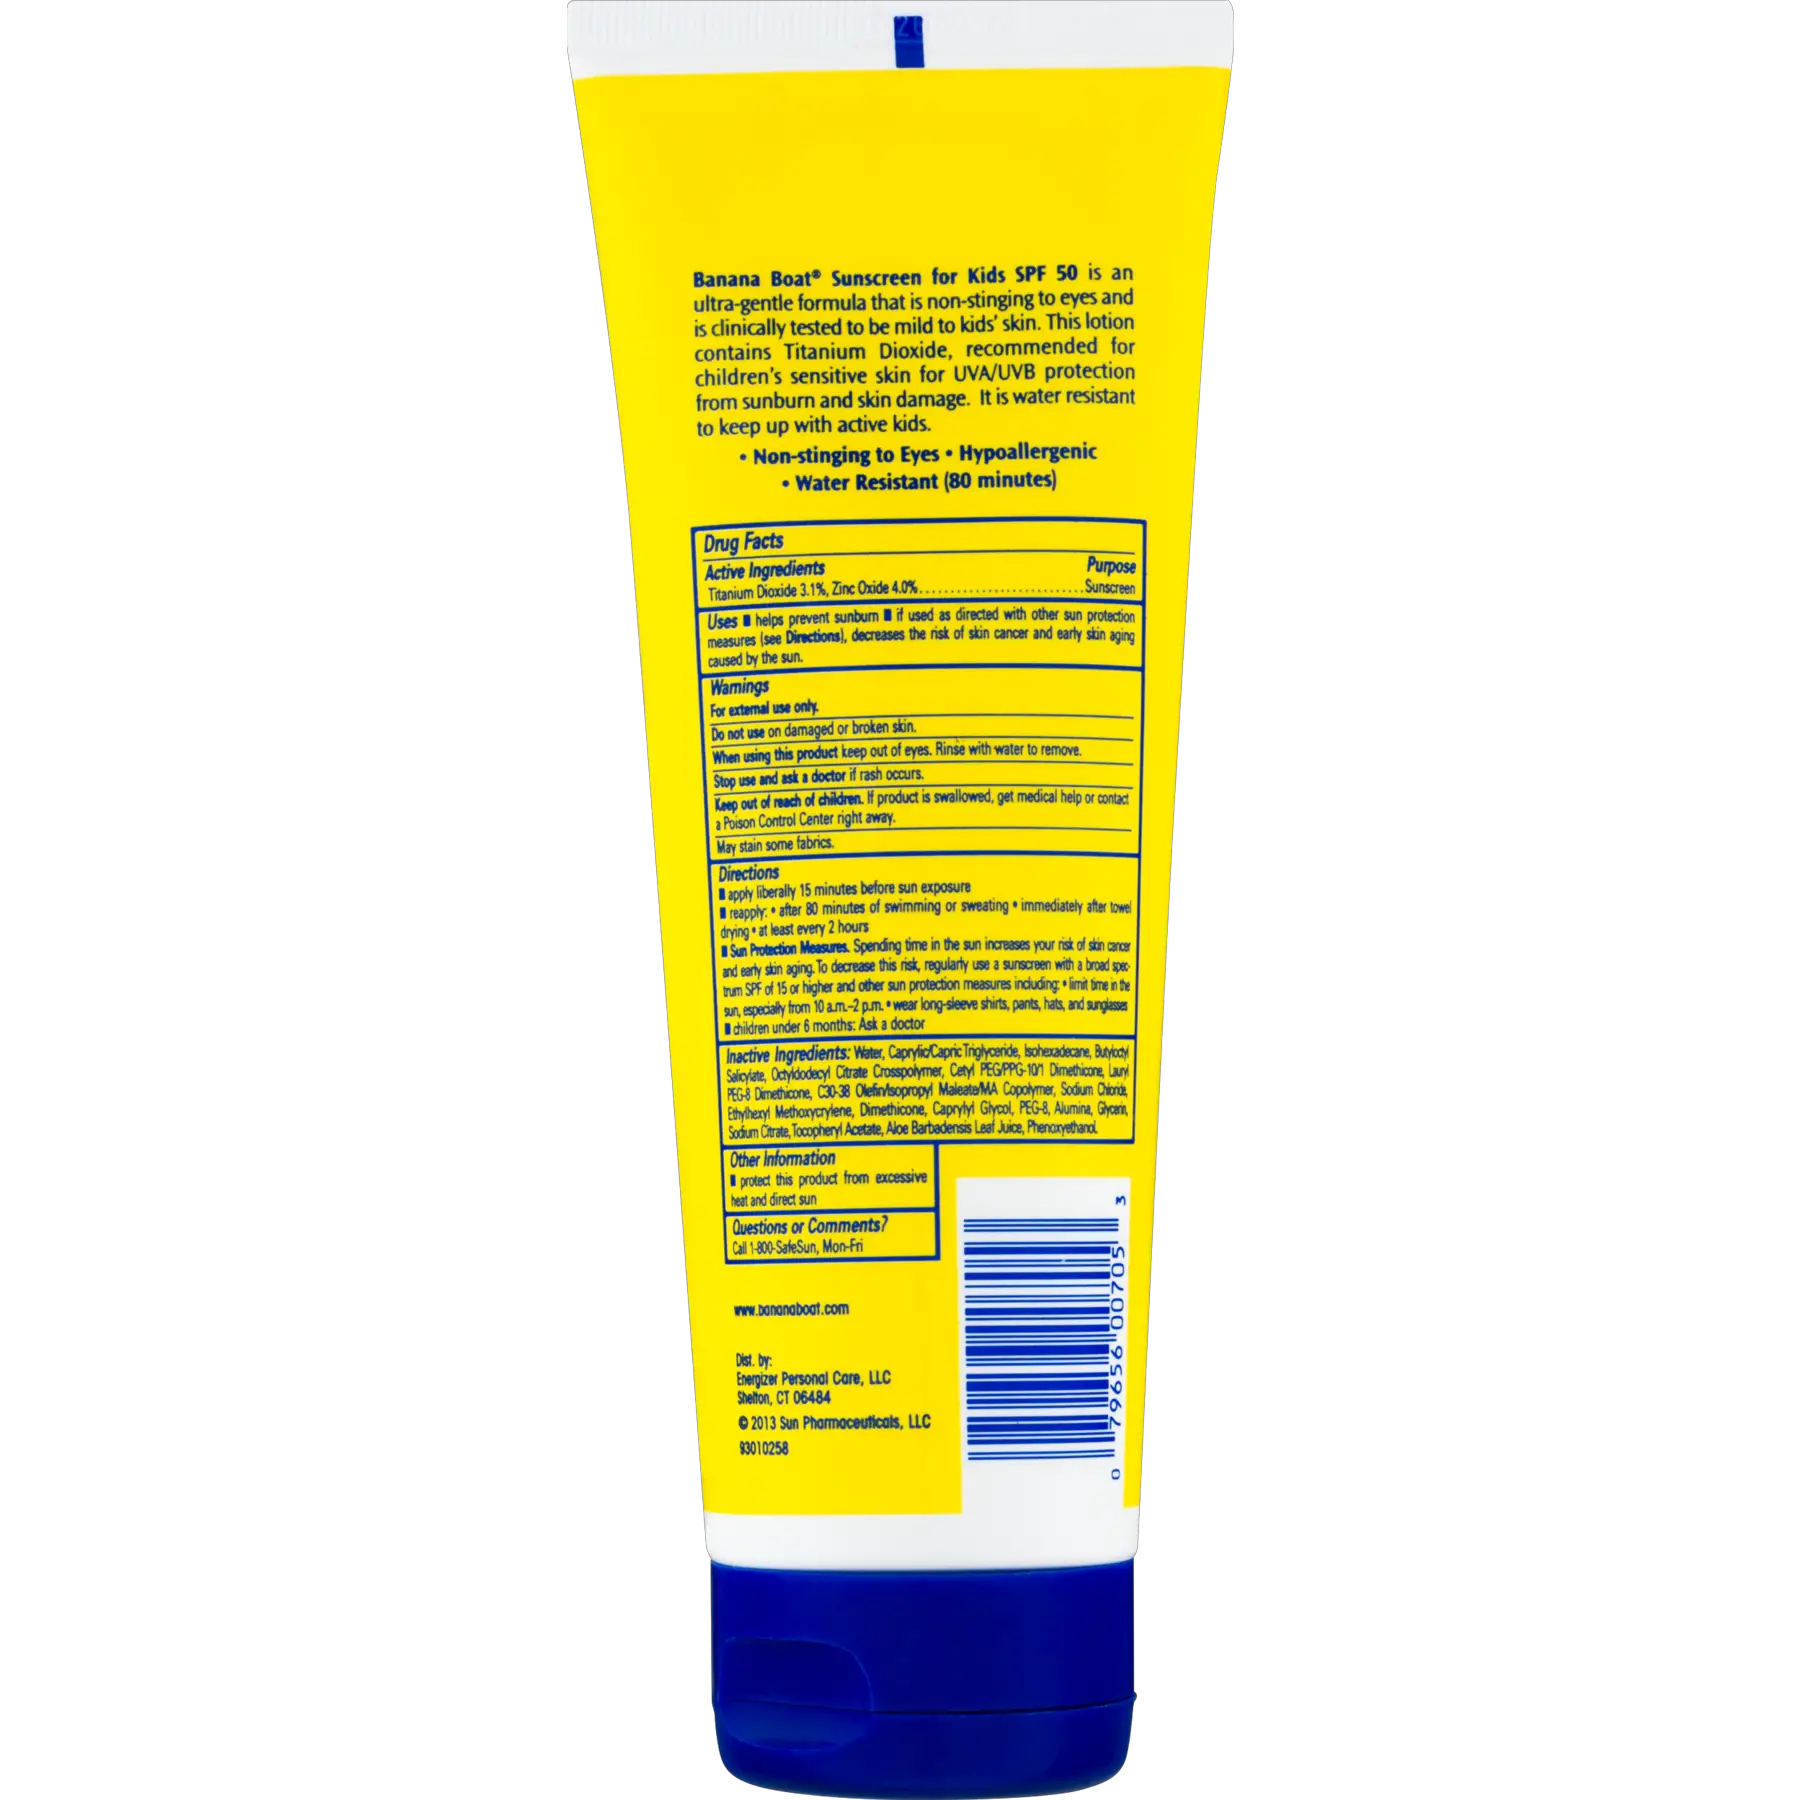 how do you read the expiration date on banana boat sunscreen?